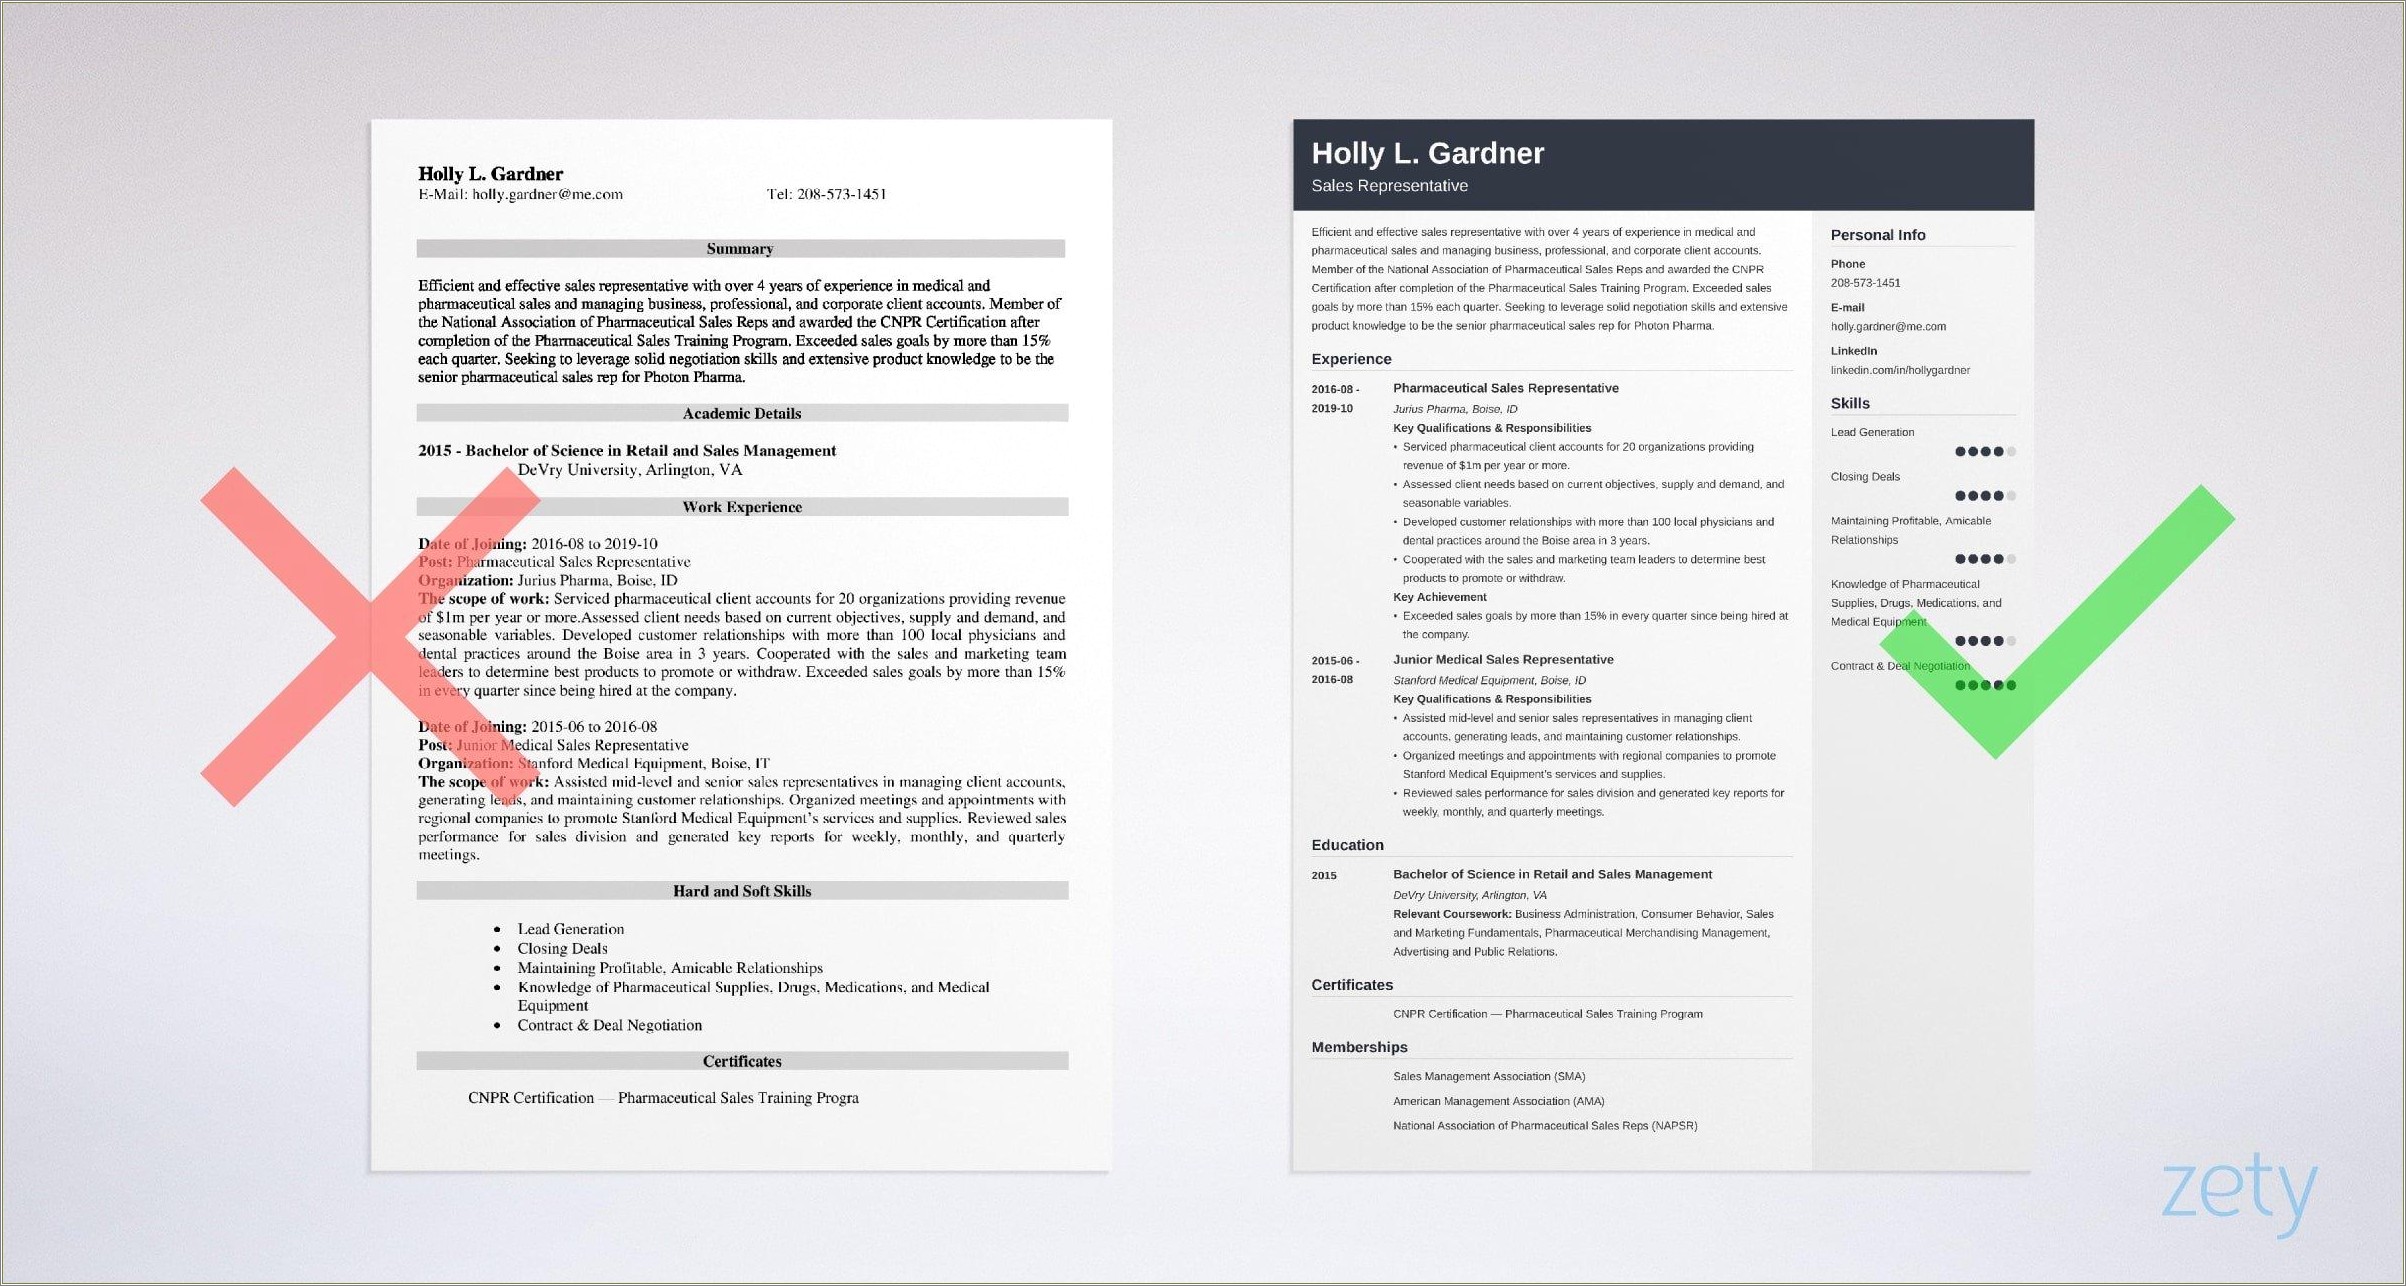 Examples Of Resumes For Sales People Without Degrees